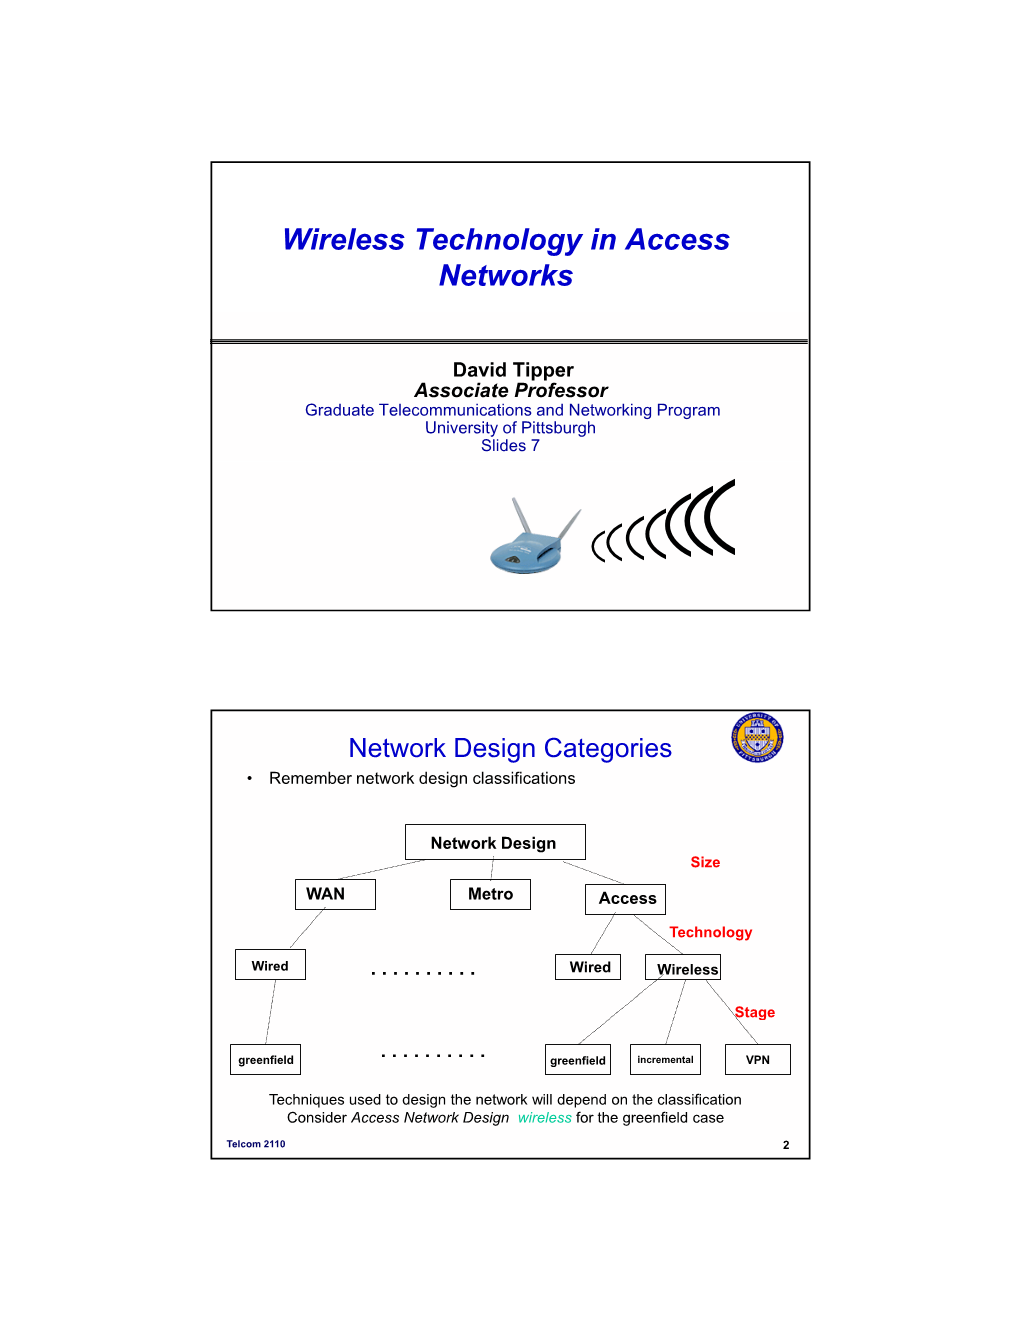 Wireless Technology in Access Networks